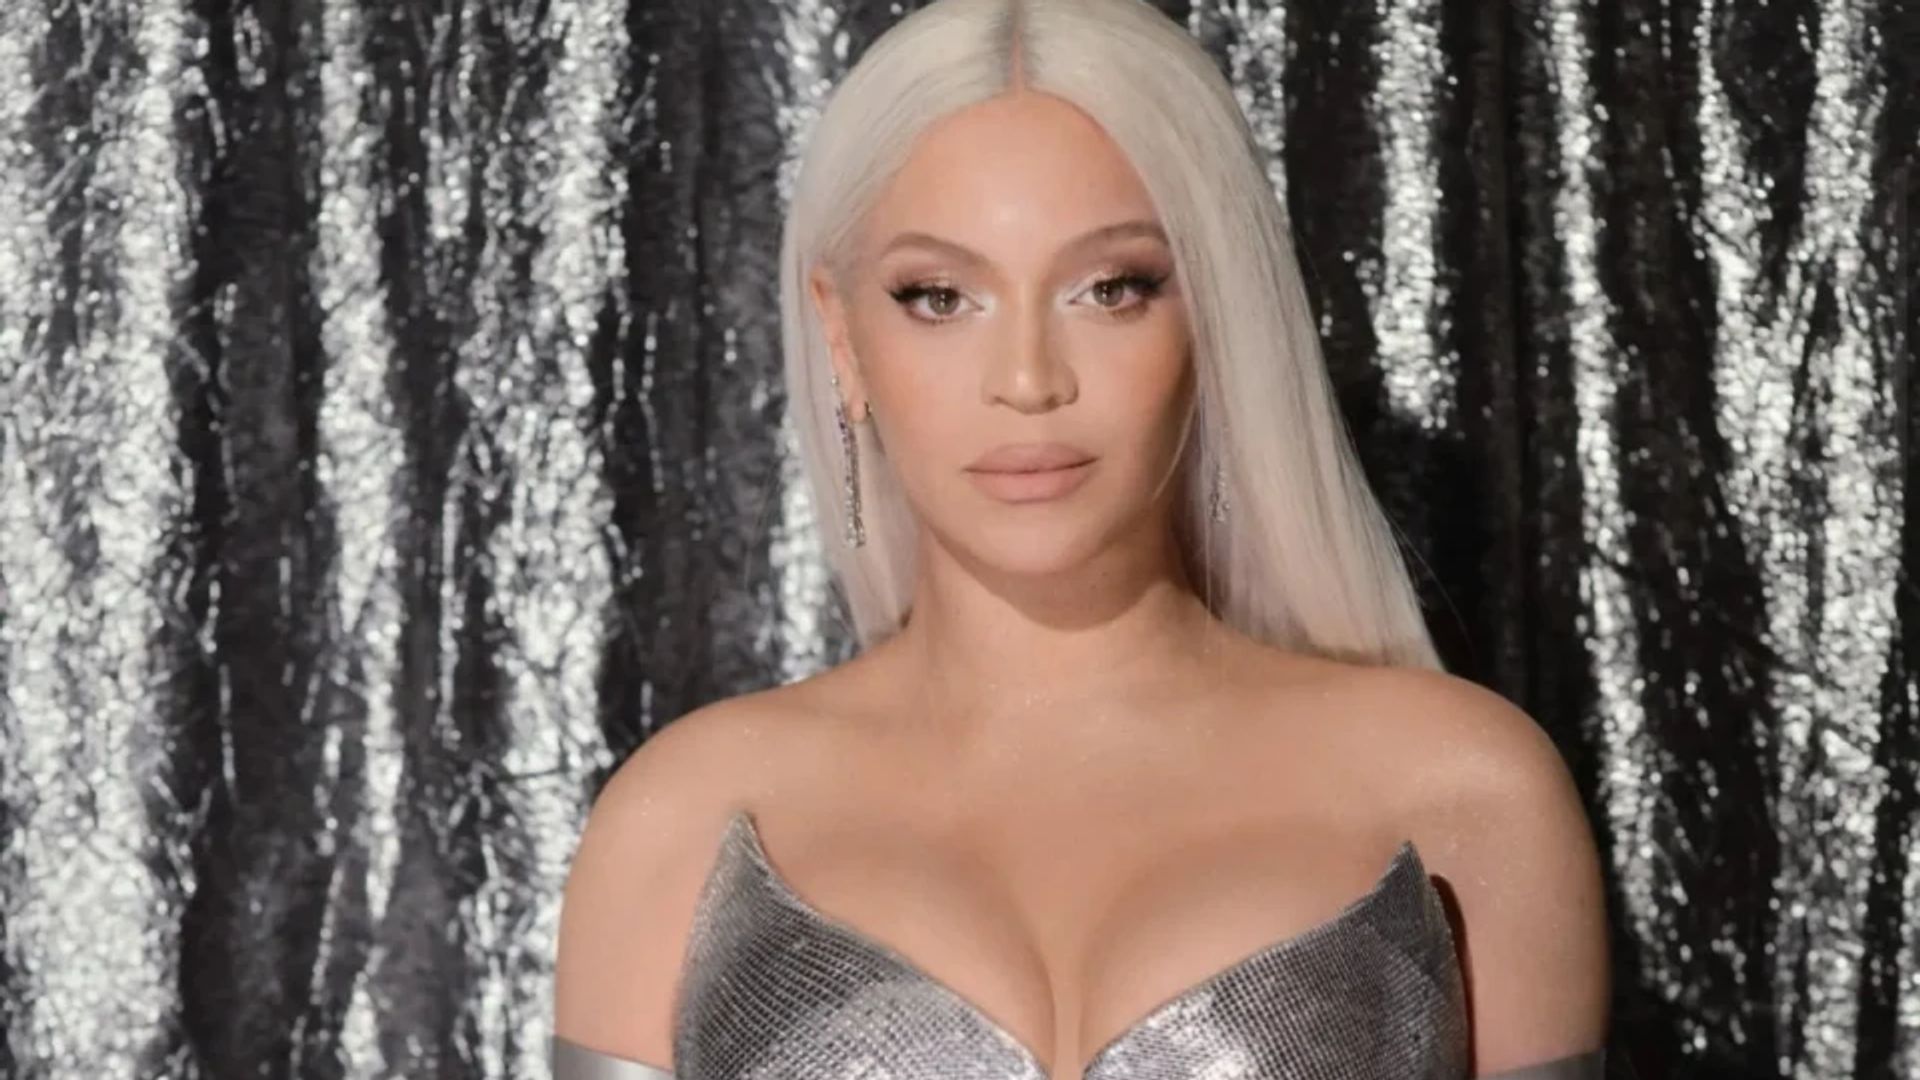 Beyonce's latest appearance in silver gown leaves fans saying the same thing